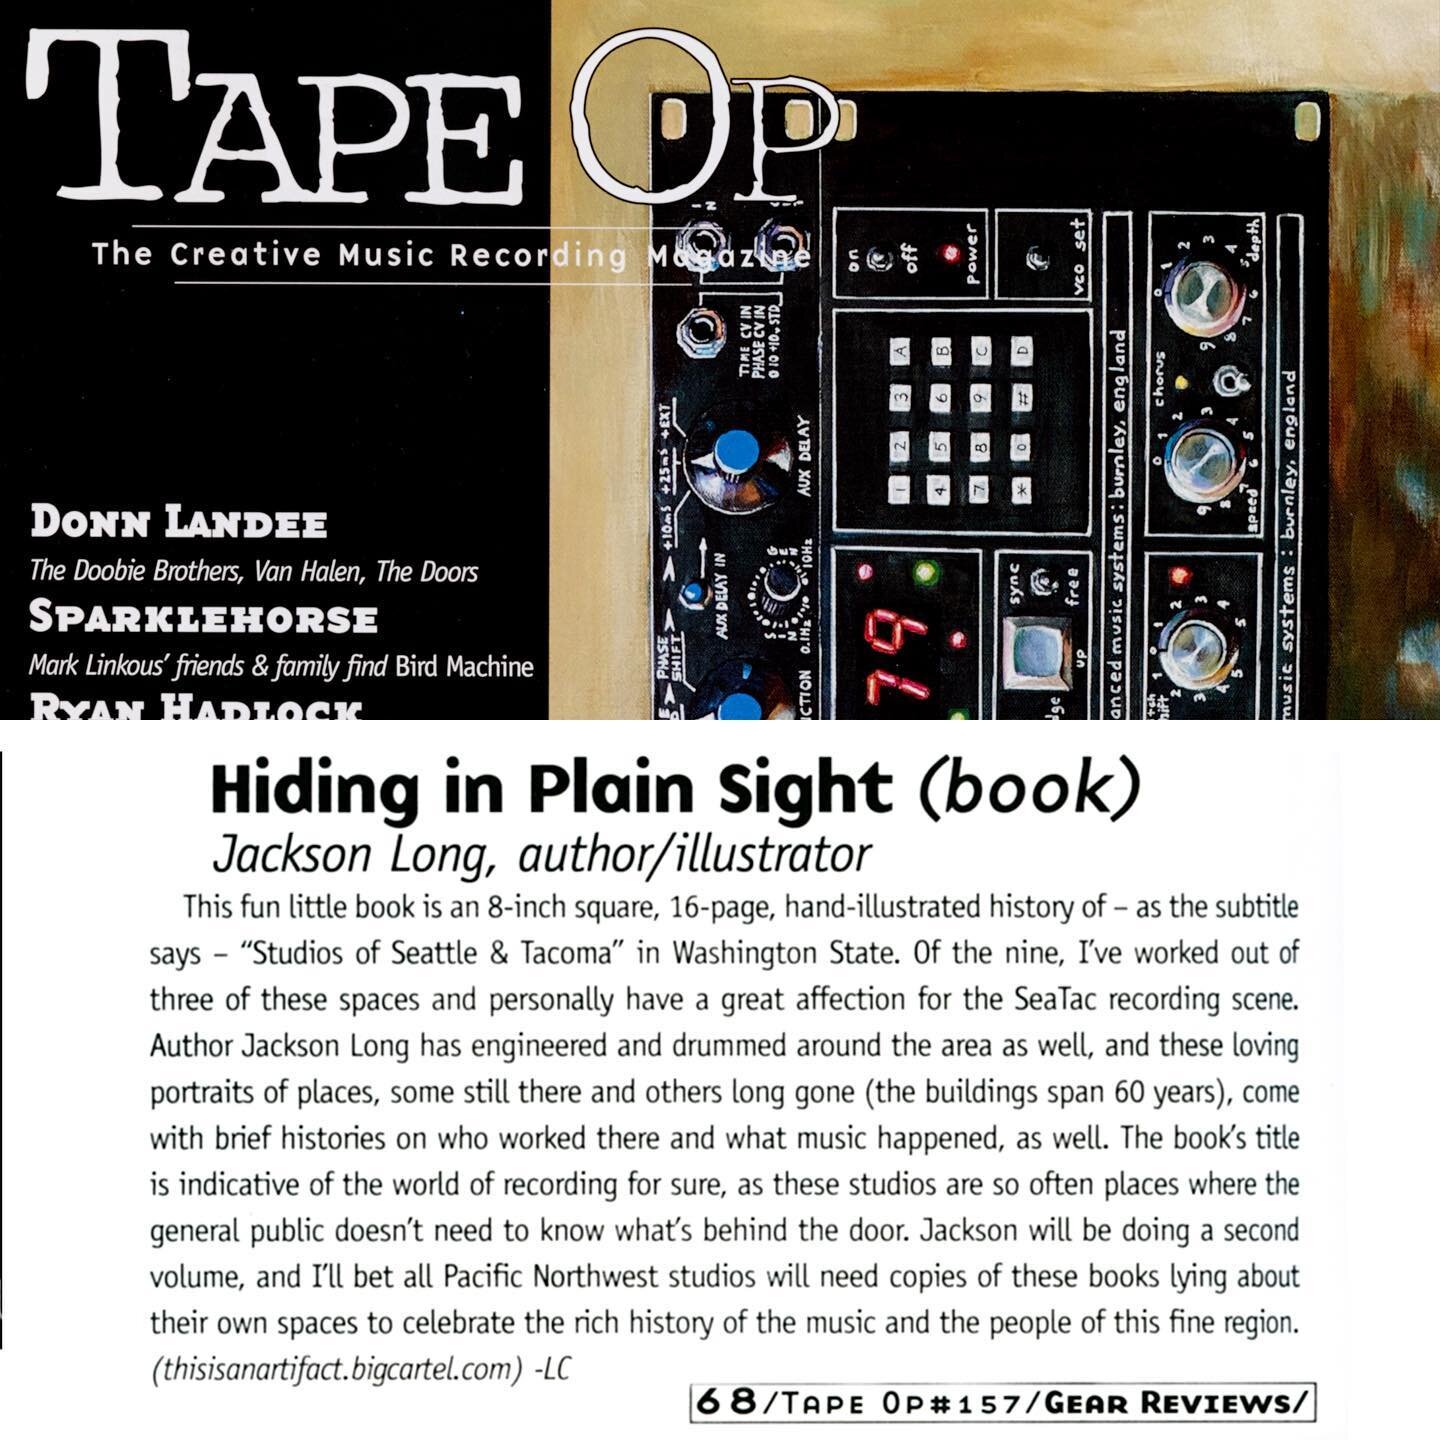 Tape Op ran a nice review of &quot;Hiding In Plain Sight&quot; in the Oct/Nov issue. Life goal achieved!  Thank you @tapeopmag